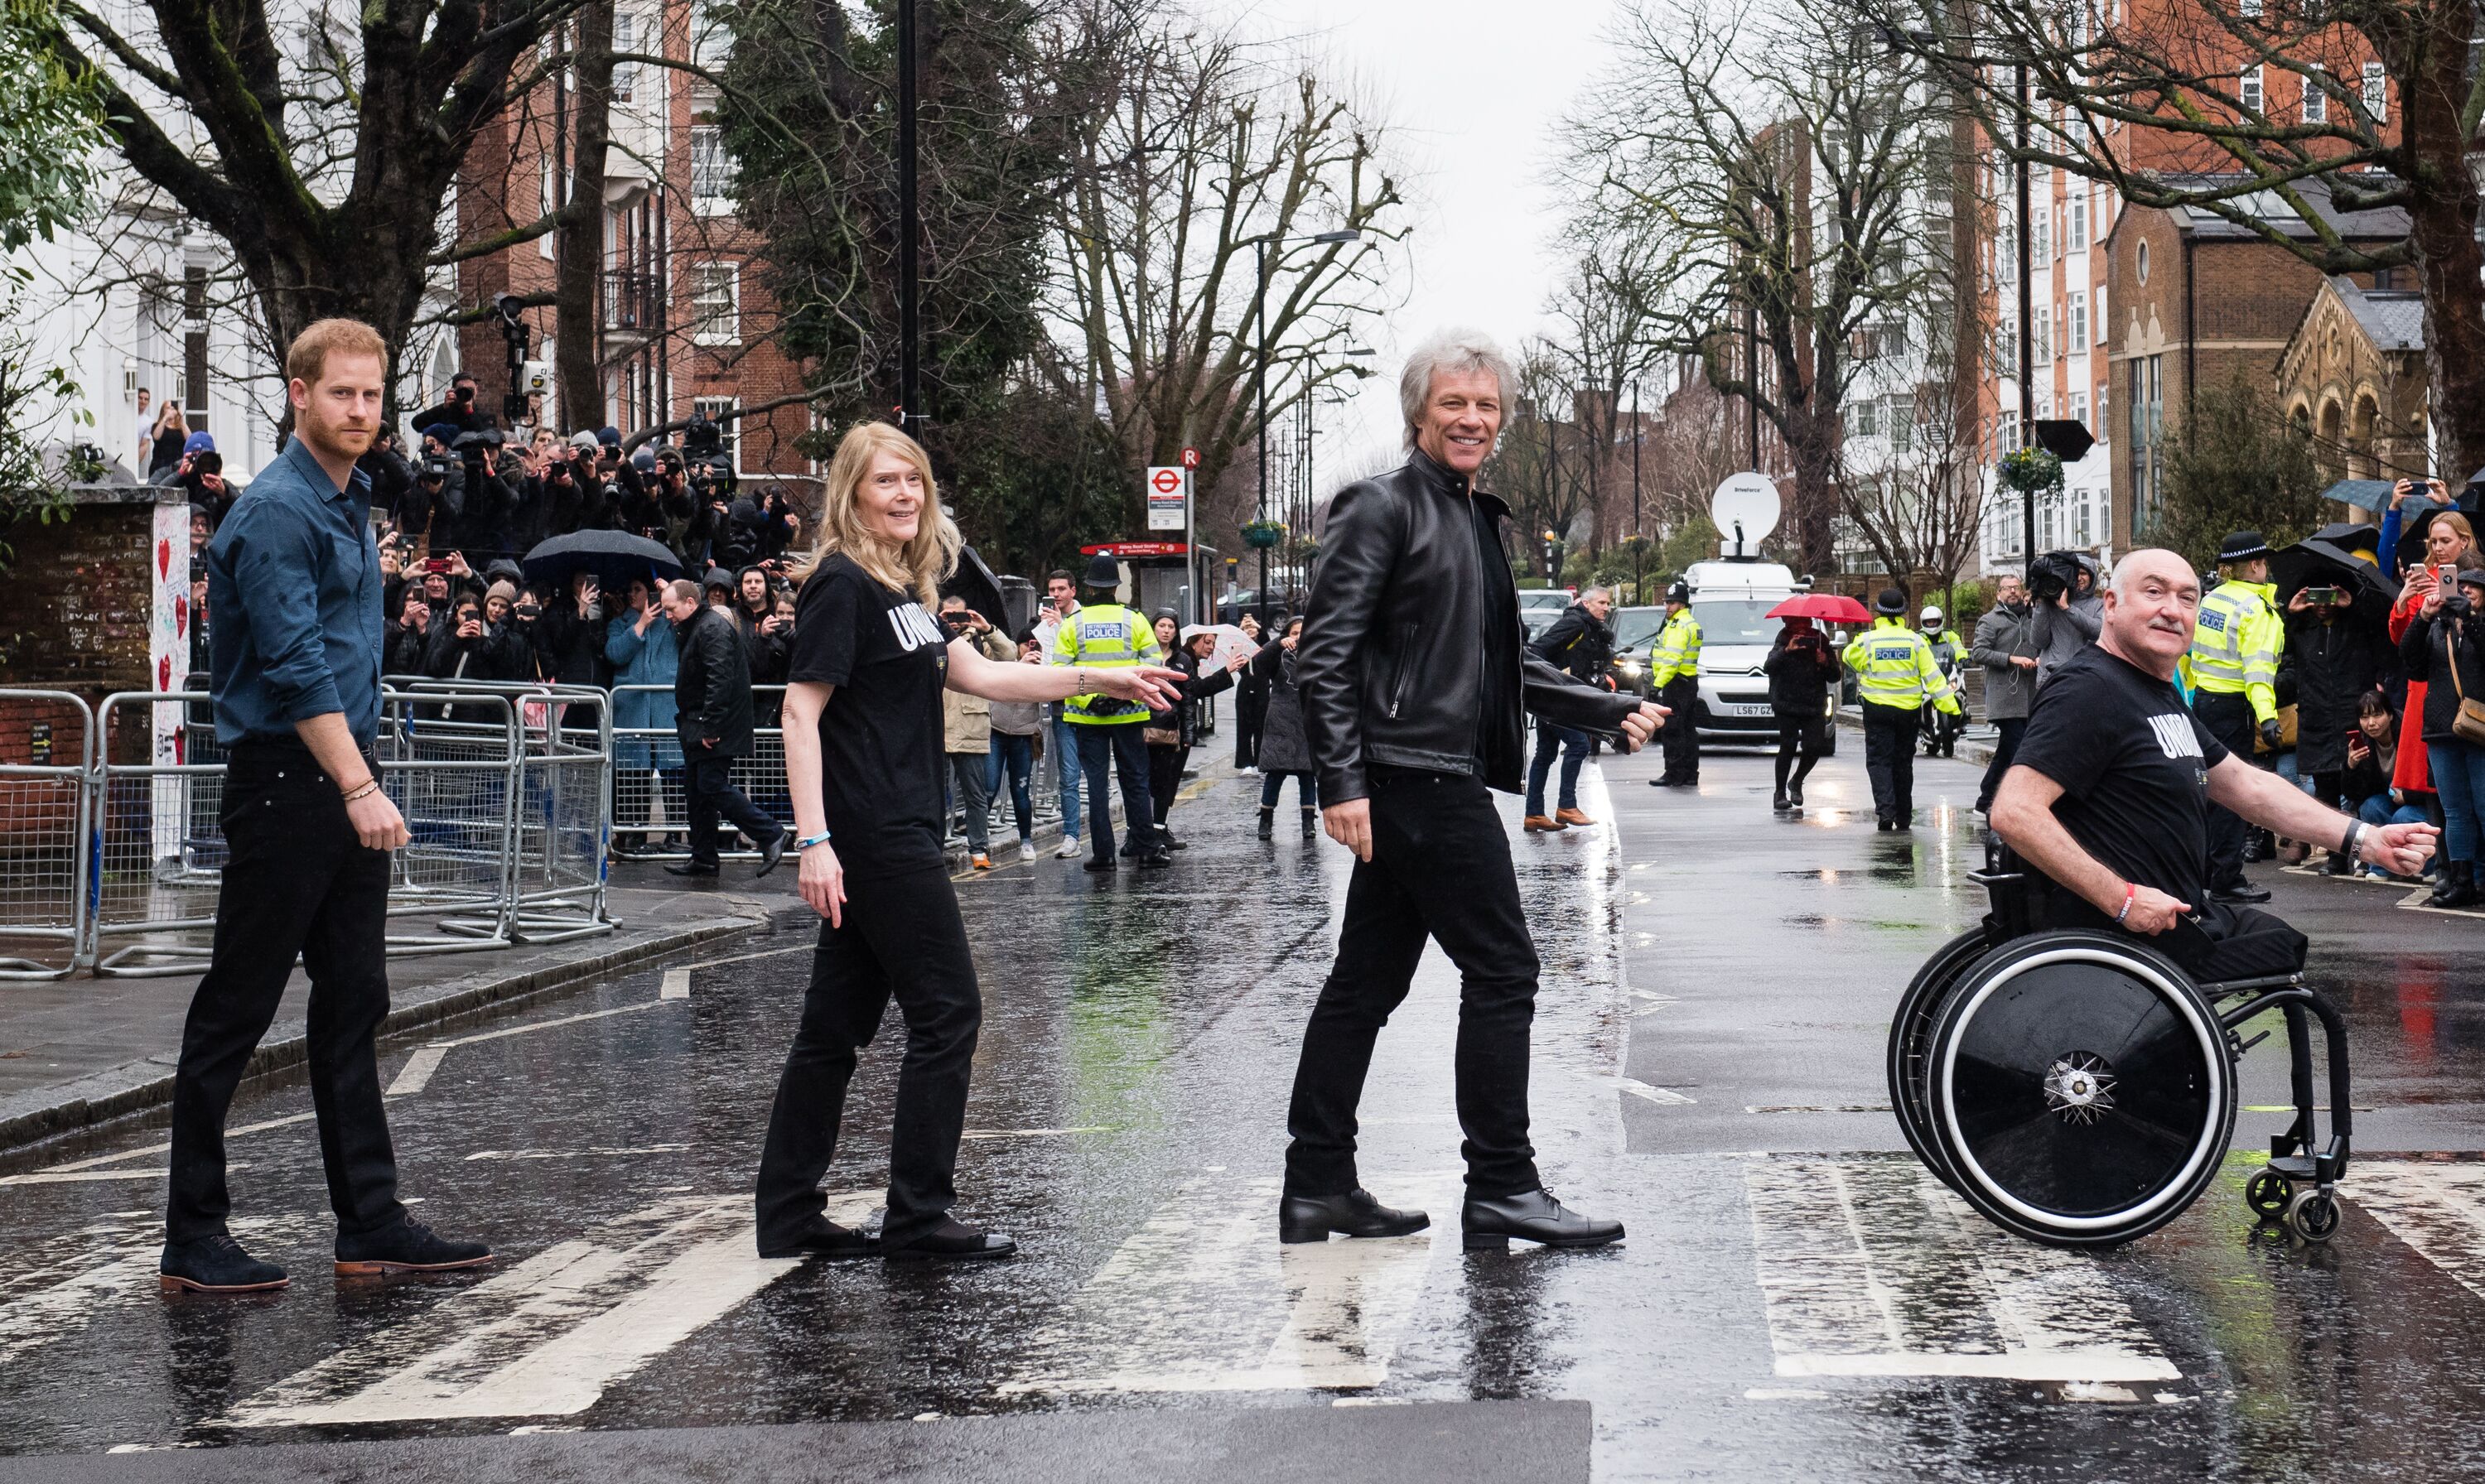 Prince Harry (L), Jon Bon Jovi (second right), and members of the Invictus Games Choir pose at Abbey Road zebra crossing on February 28, 2020, in London, England | Photo: Samir Hussein/WireImage/Getty Images